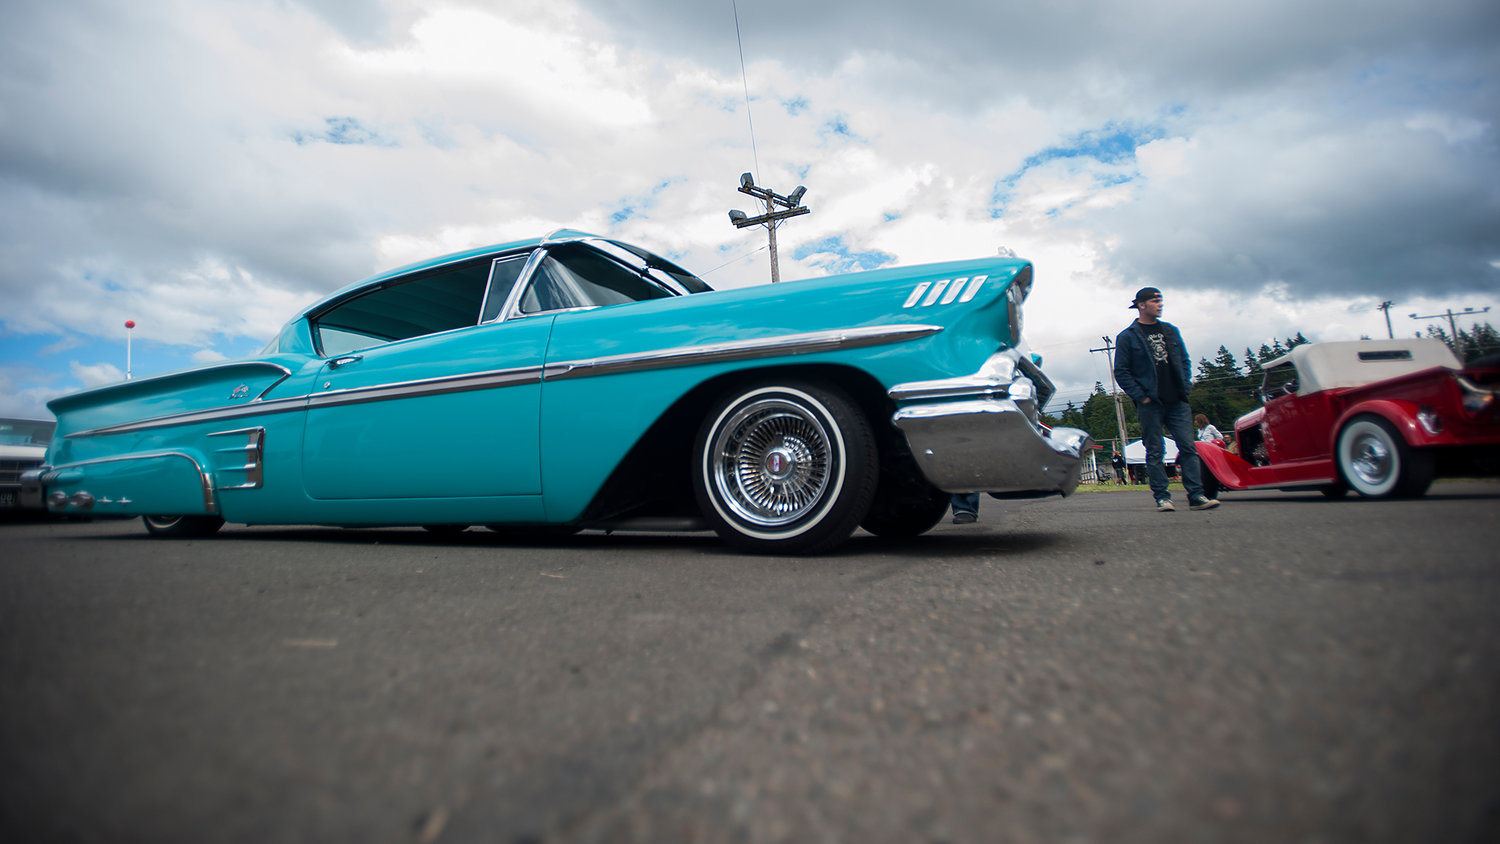 Hundreds of car enthusiasts showed up at the Southwest Washington Fairgrounds in Chehalis for the Billetproof Car Show on Saturday afternoon. Owners of hot rods and custom cars revved their engines across the pavement at the fairgrounds.